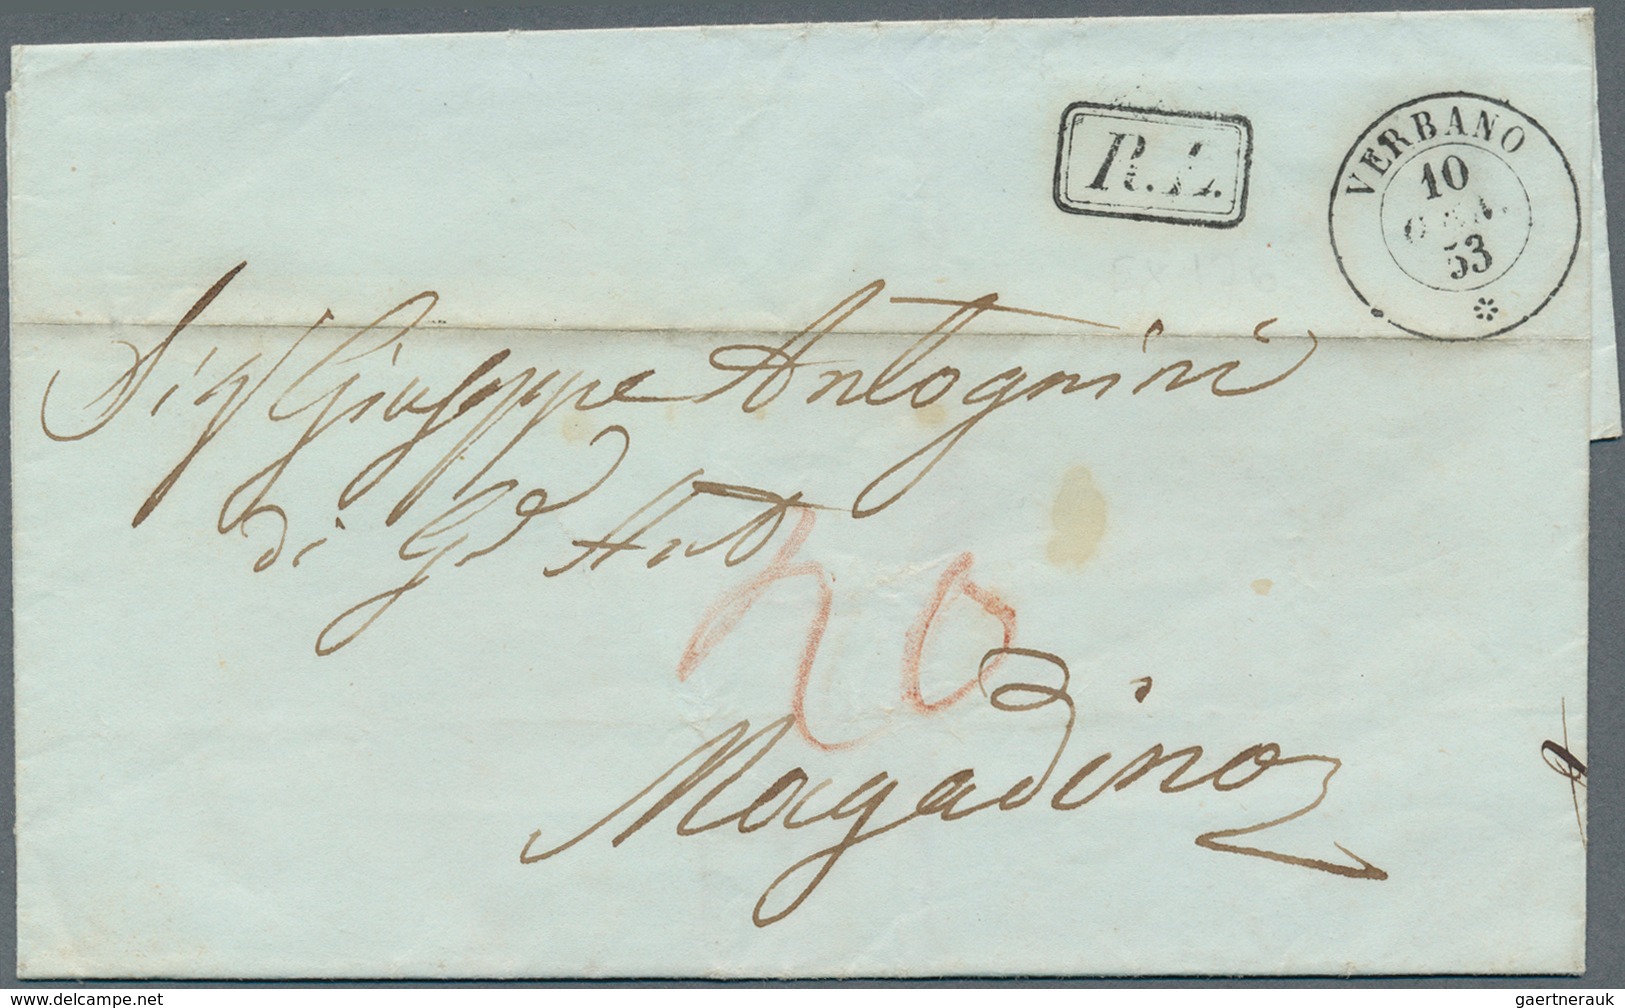 26913 Italien: 1818/1860, interesting lot of ca. 23 folded letters abroad with many TRANSIT-handstamps, mo